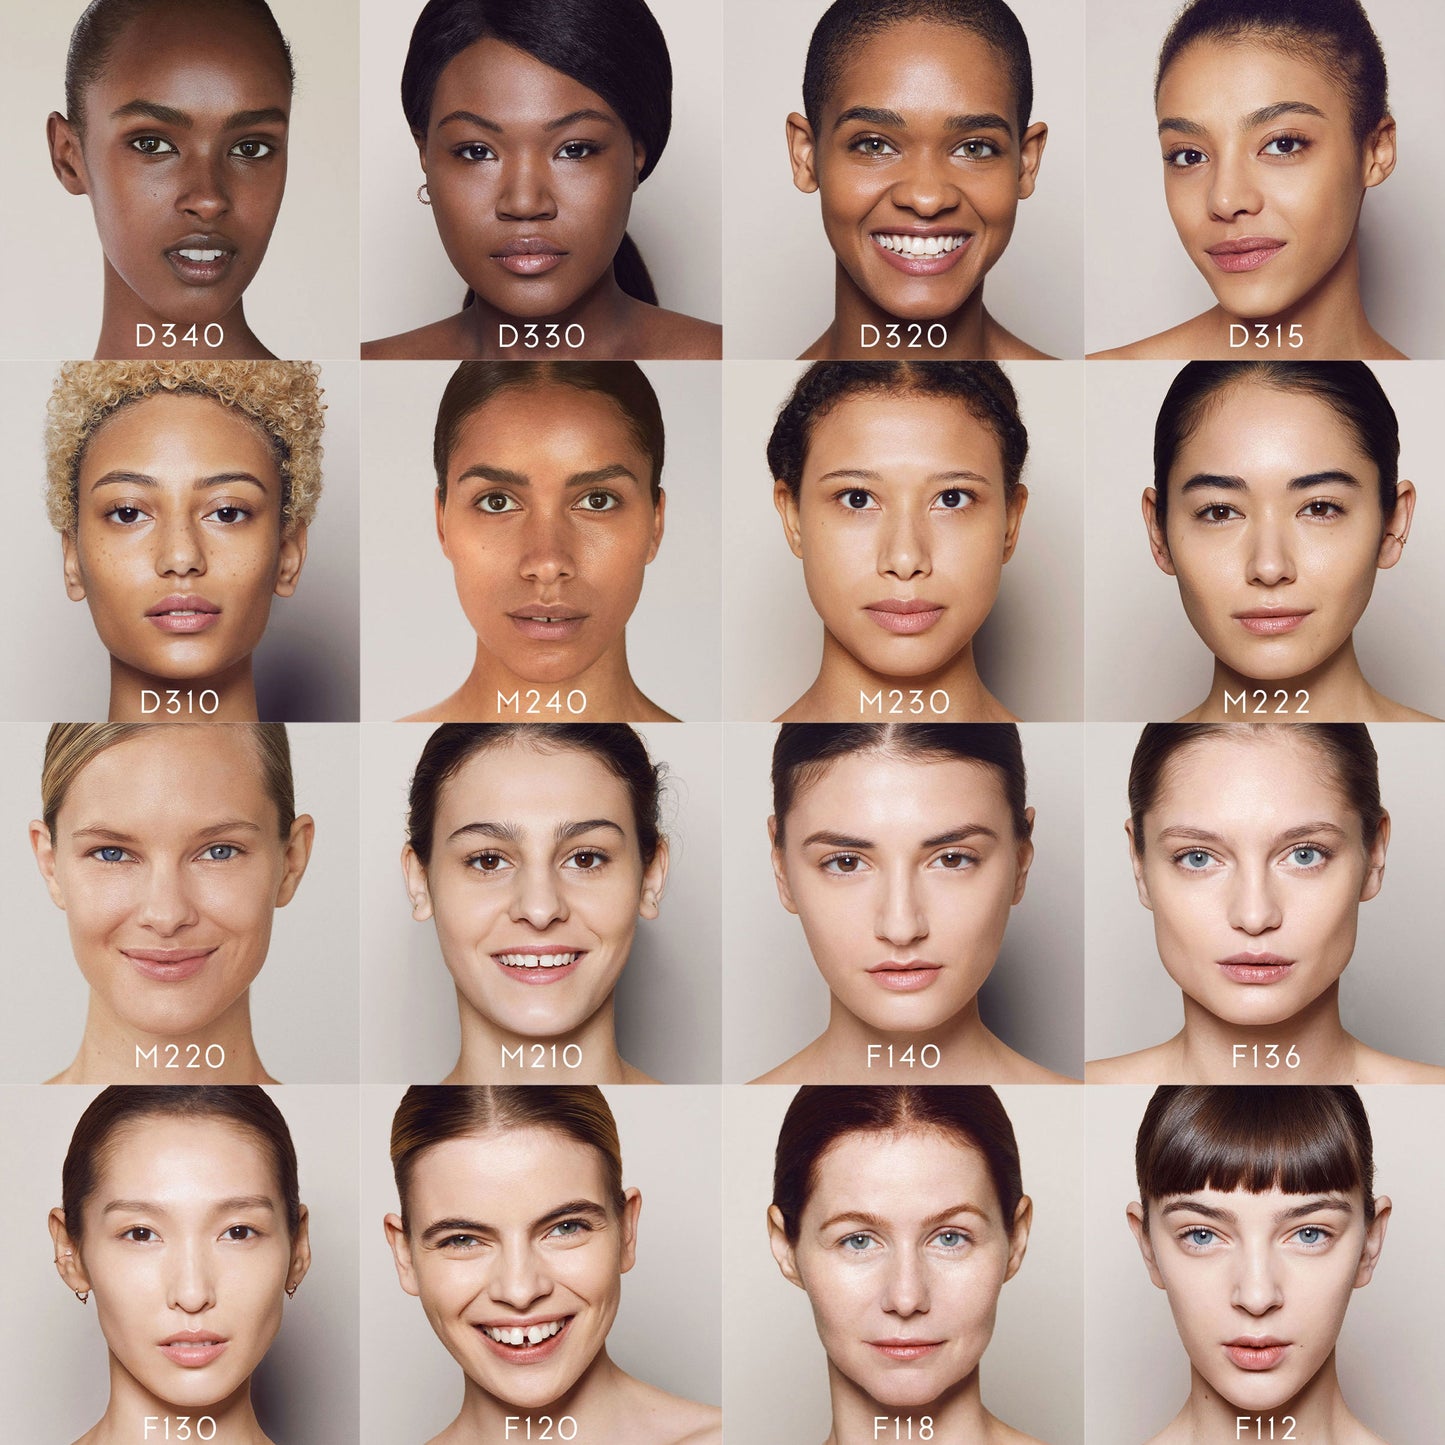 Close ups of various faces of different skin tones, from dark to light and the concealer shades they are wearing. 